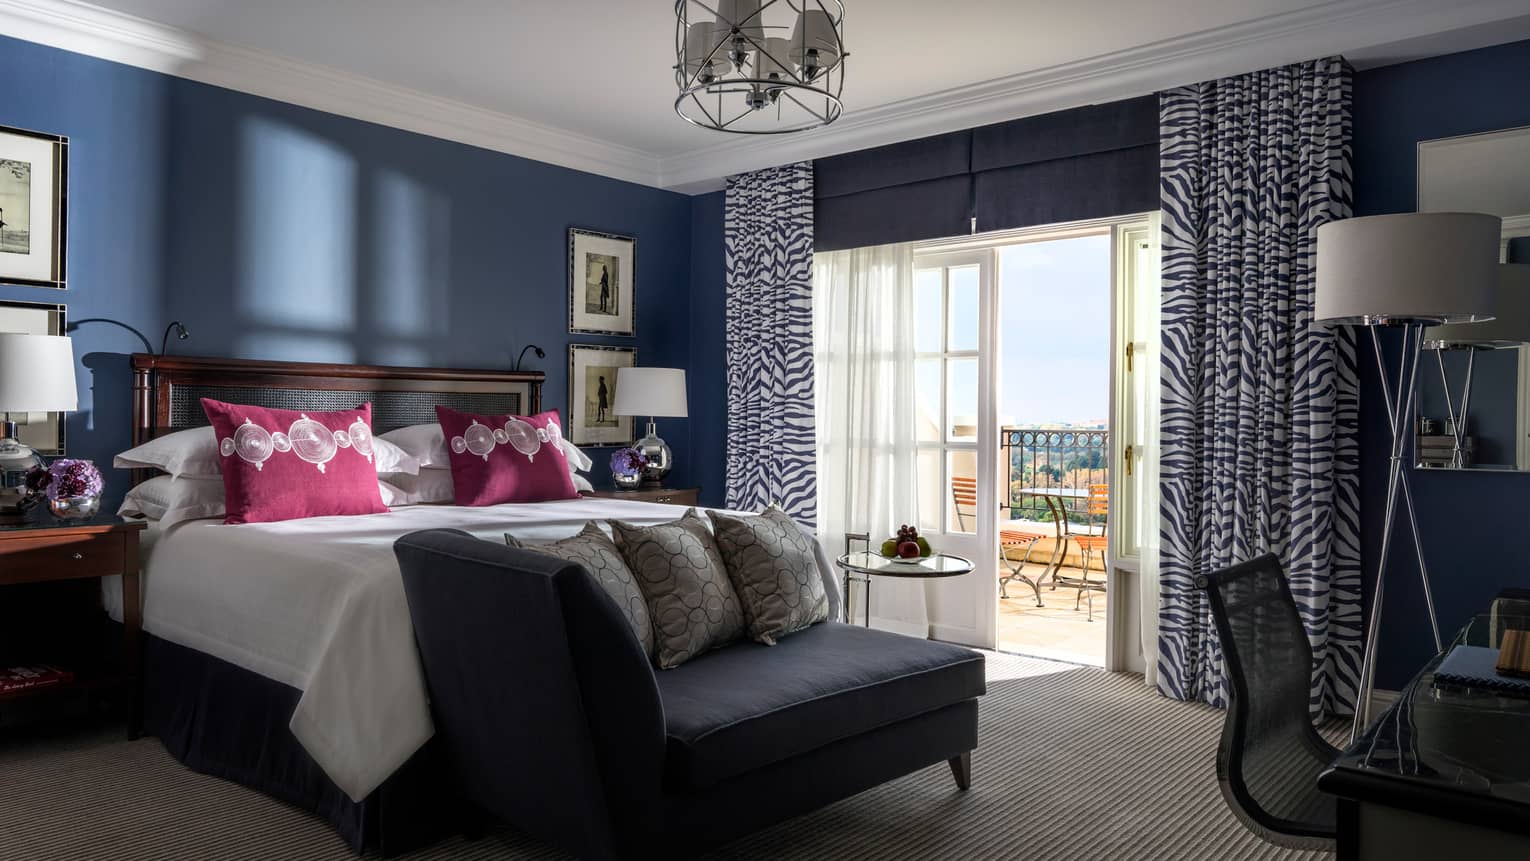 Hotel room with navy walls, white bed and magenta pillows, black settee at foot, zebra curtains by french doors